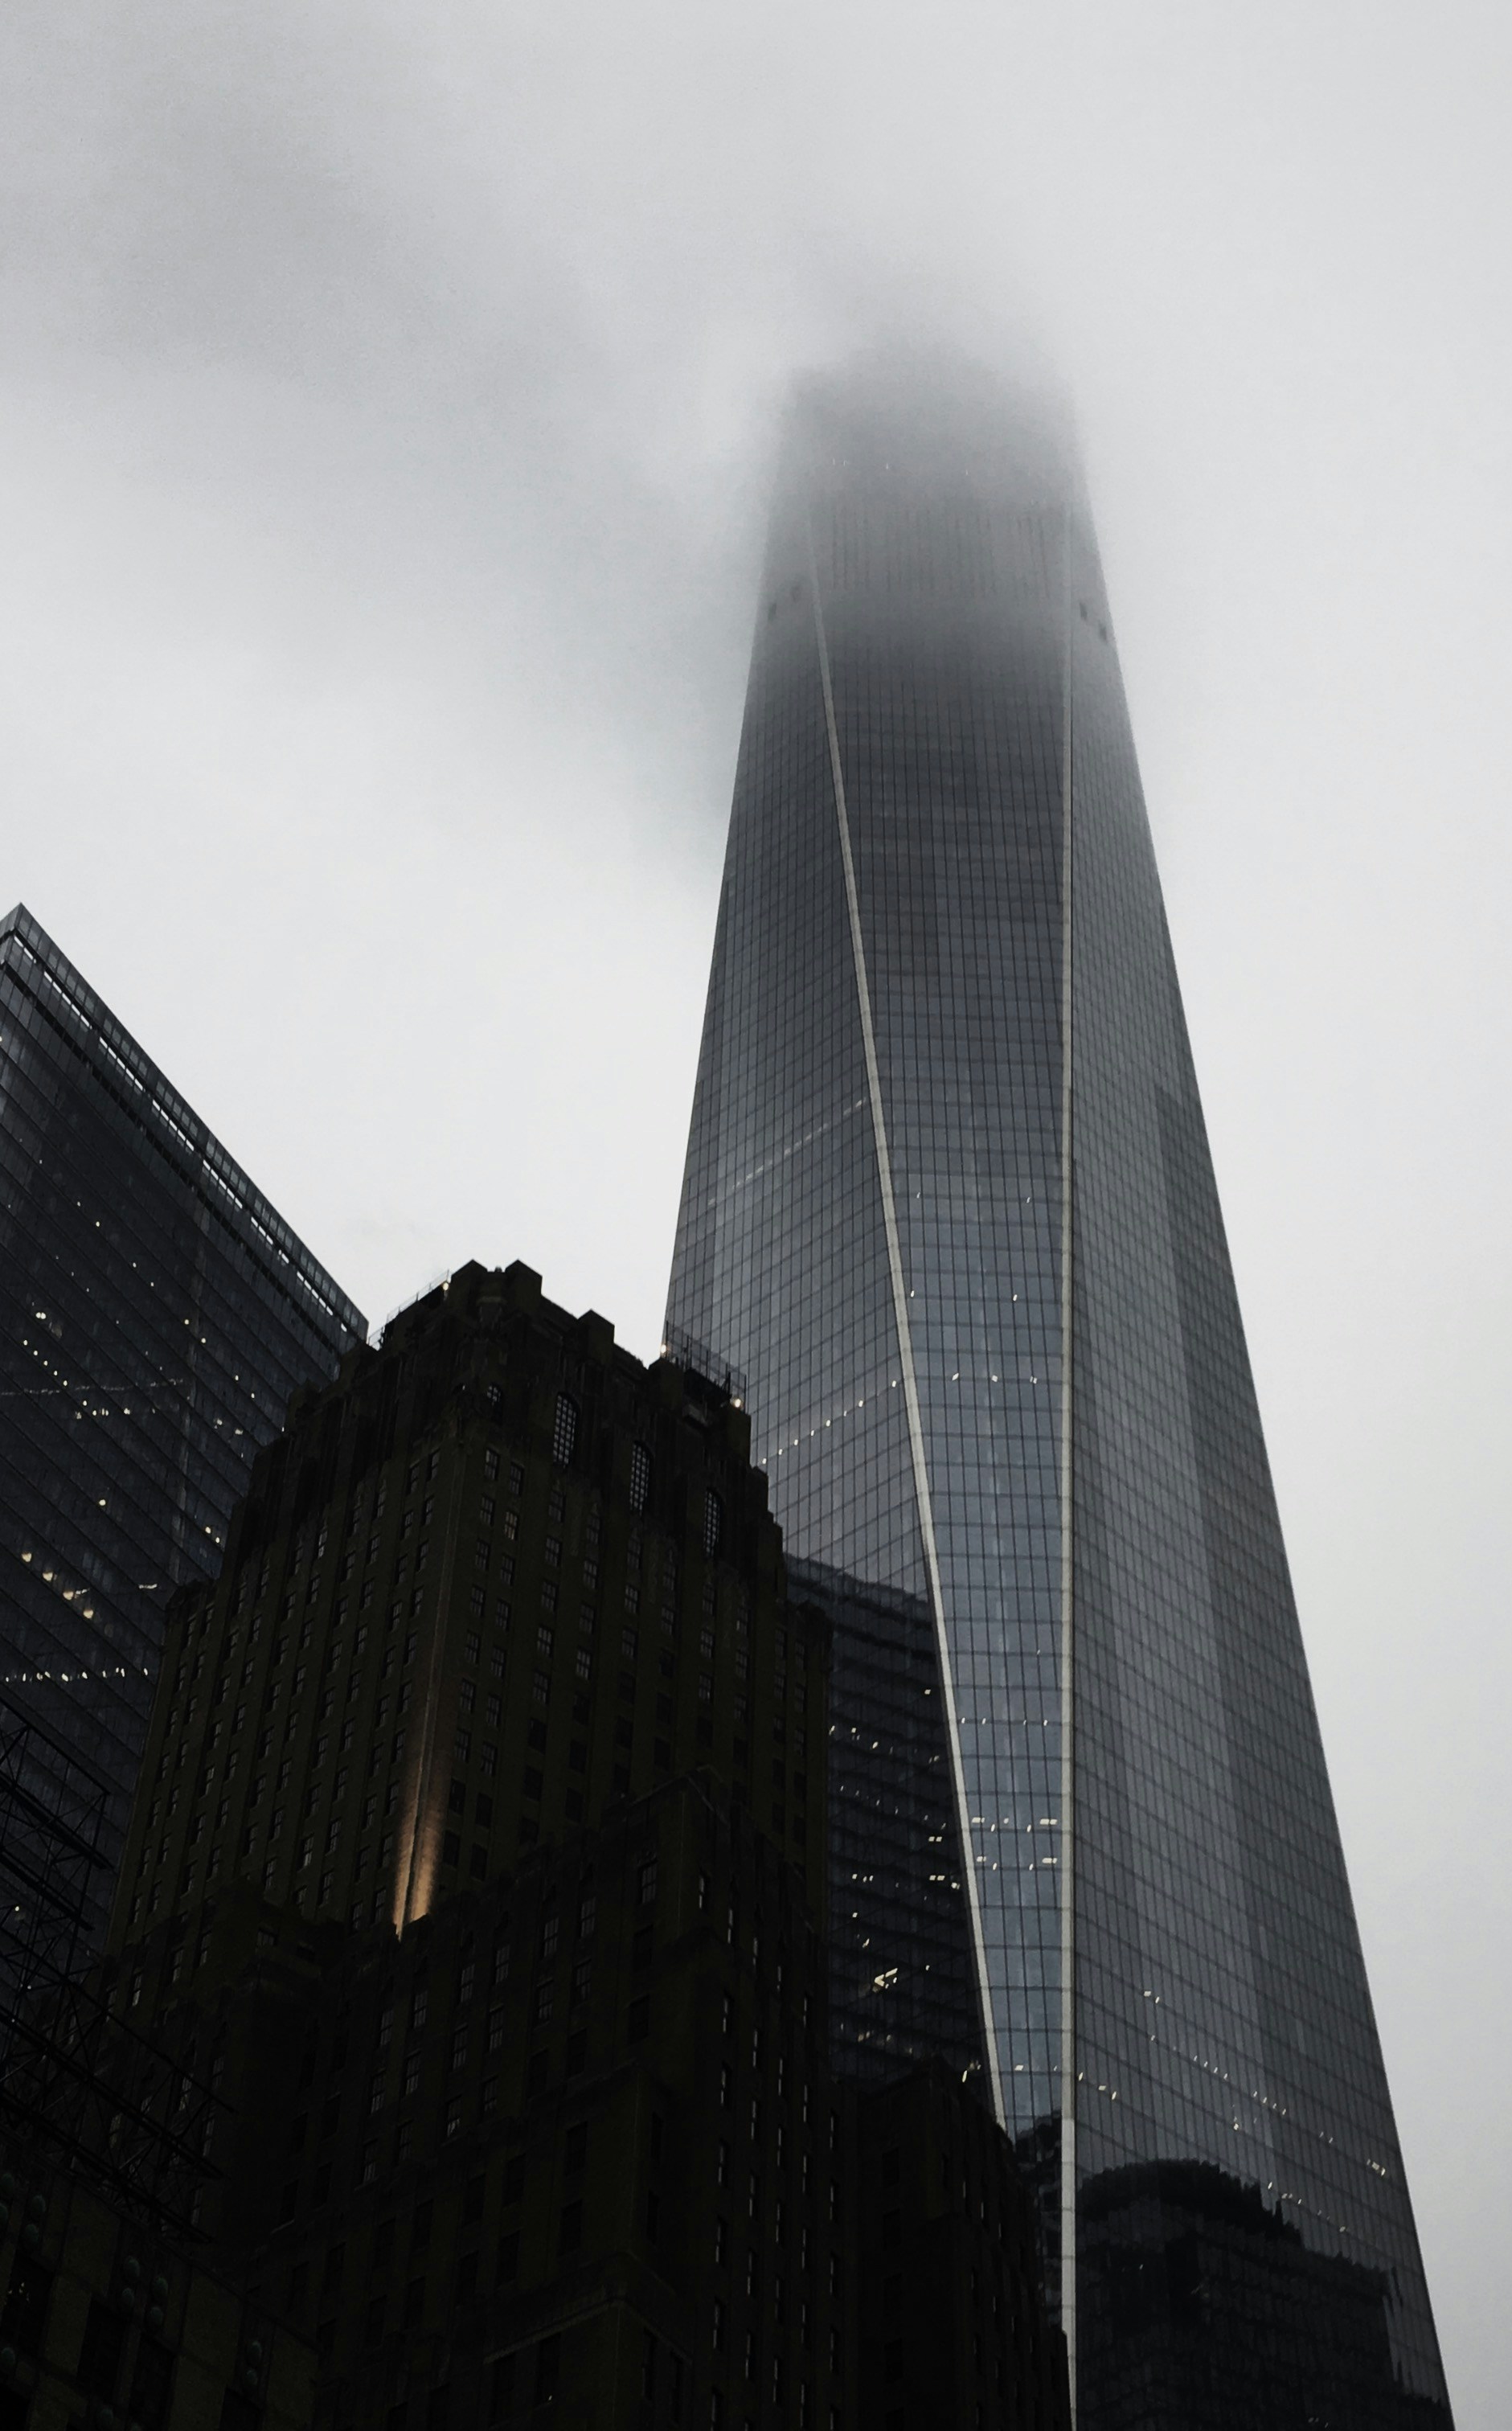 A look up shot of the world trade centre on a dreary rainy day in NYC.